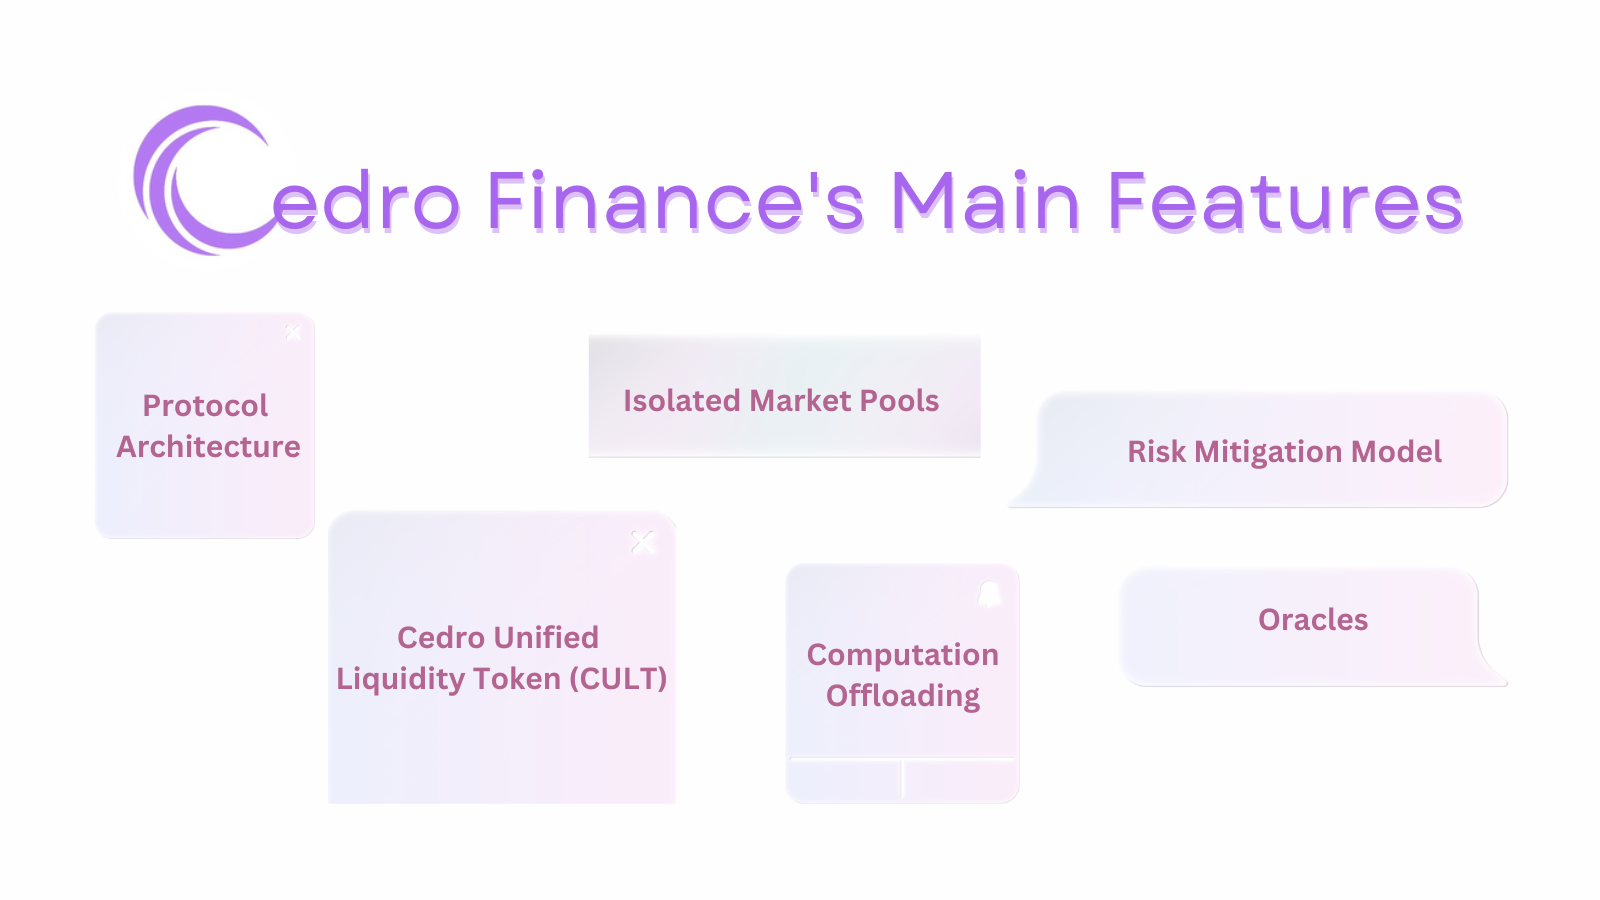 Cedro's Main Features